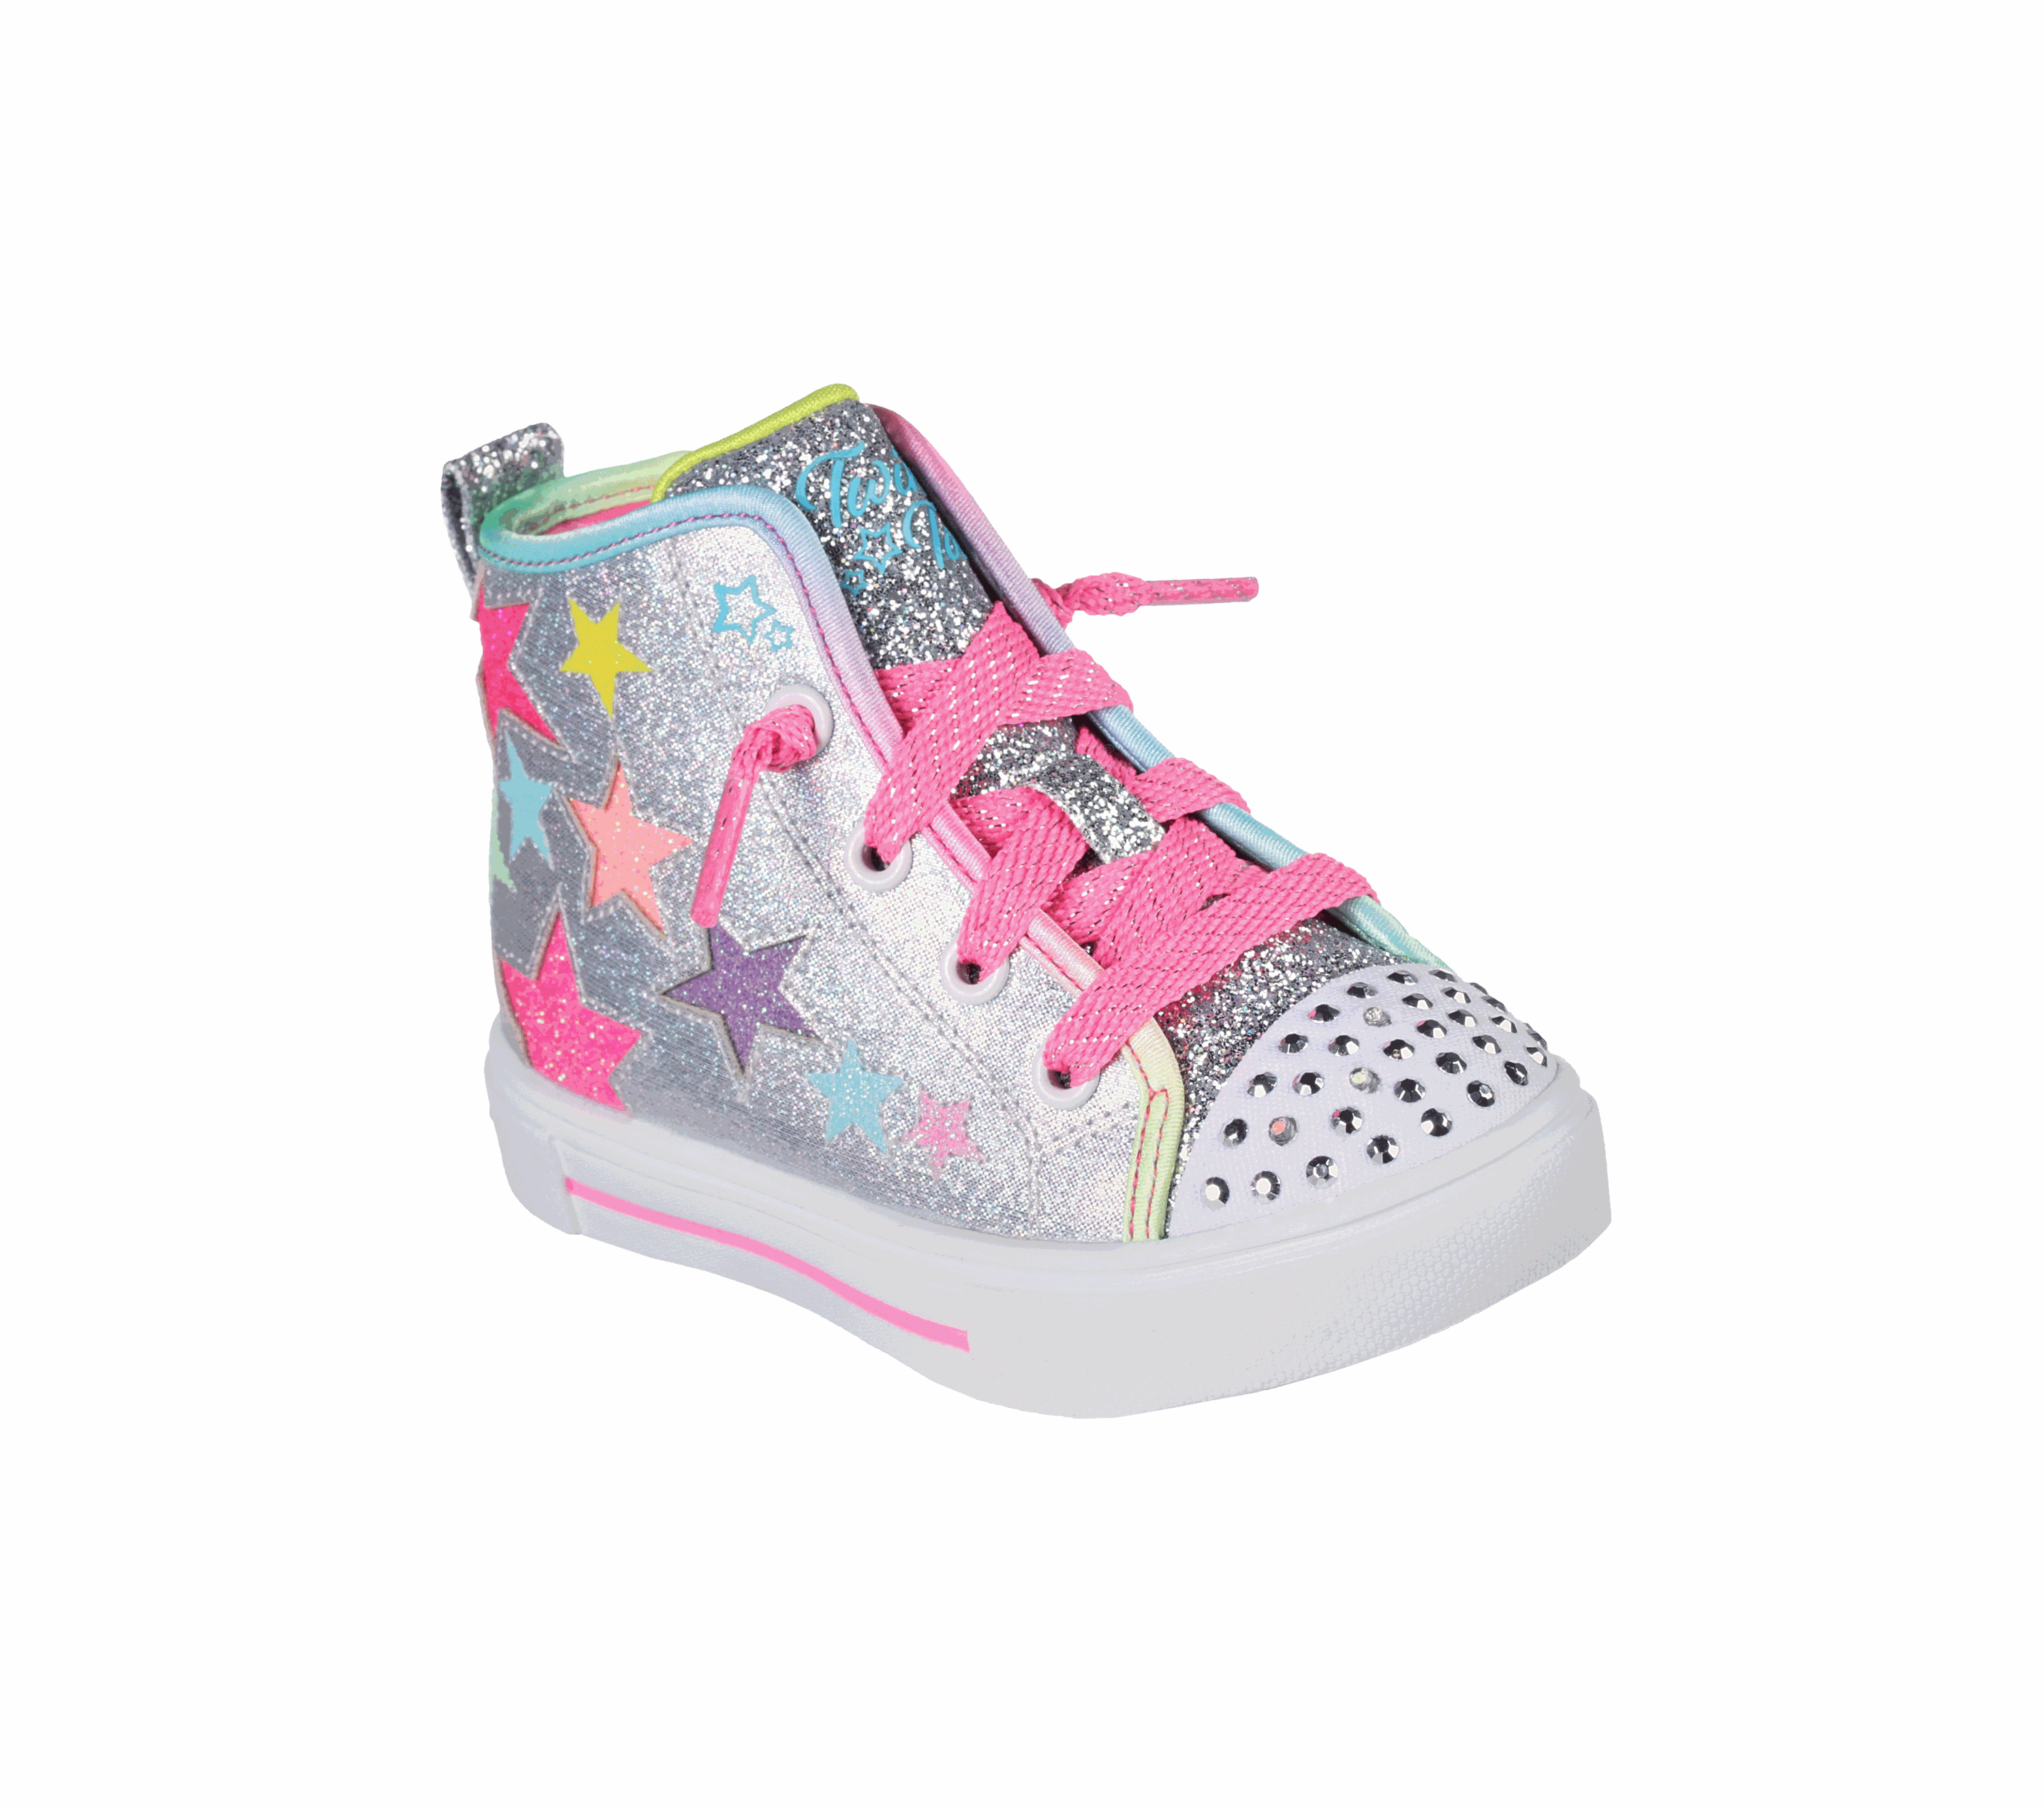 skechers twinkle toes toddler size 10